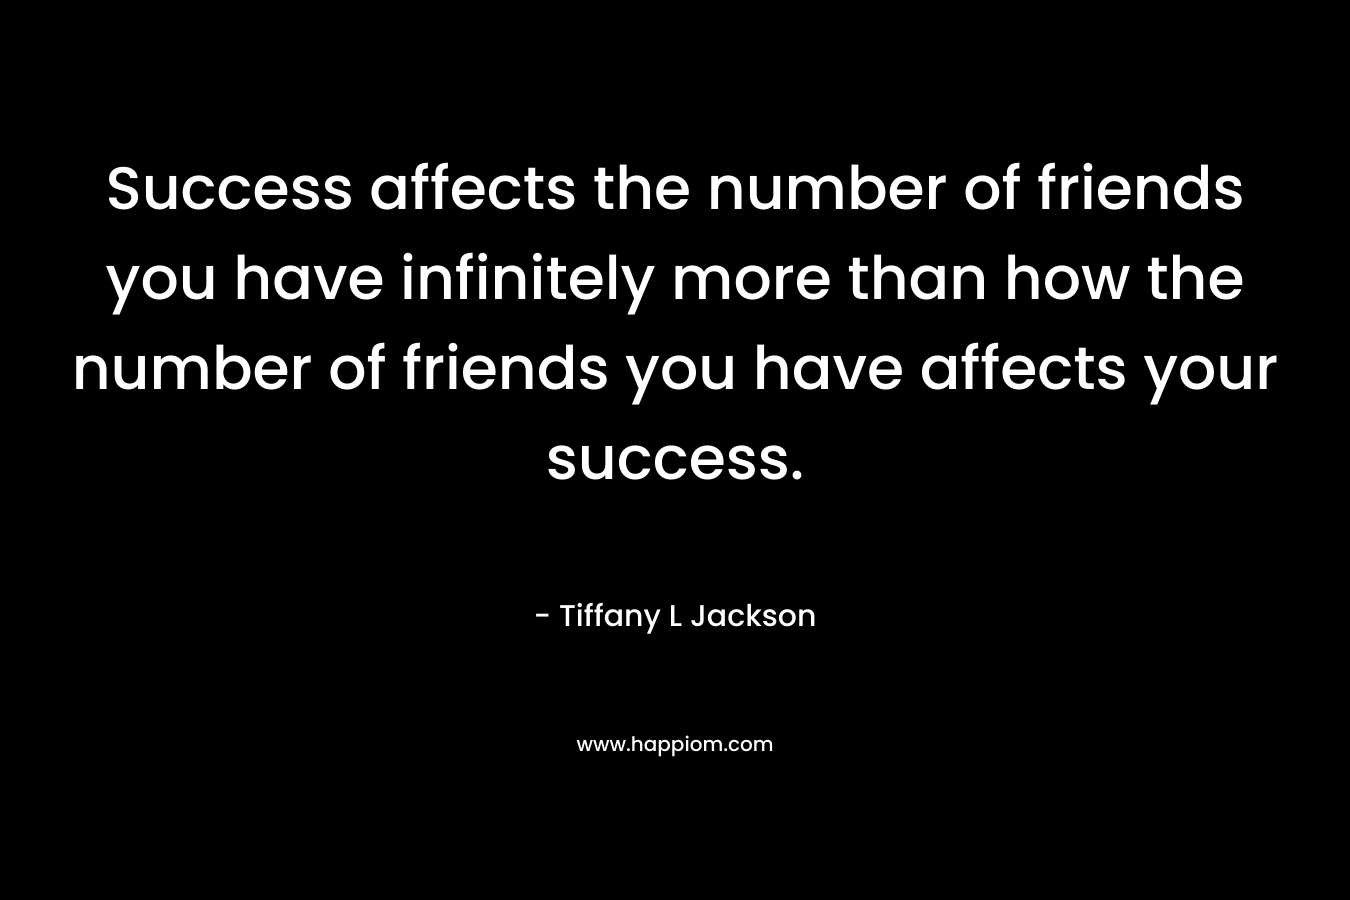 Success affects the number of friends you have infinitely more than how the number of friends you have affects your success.